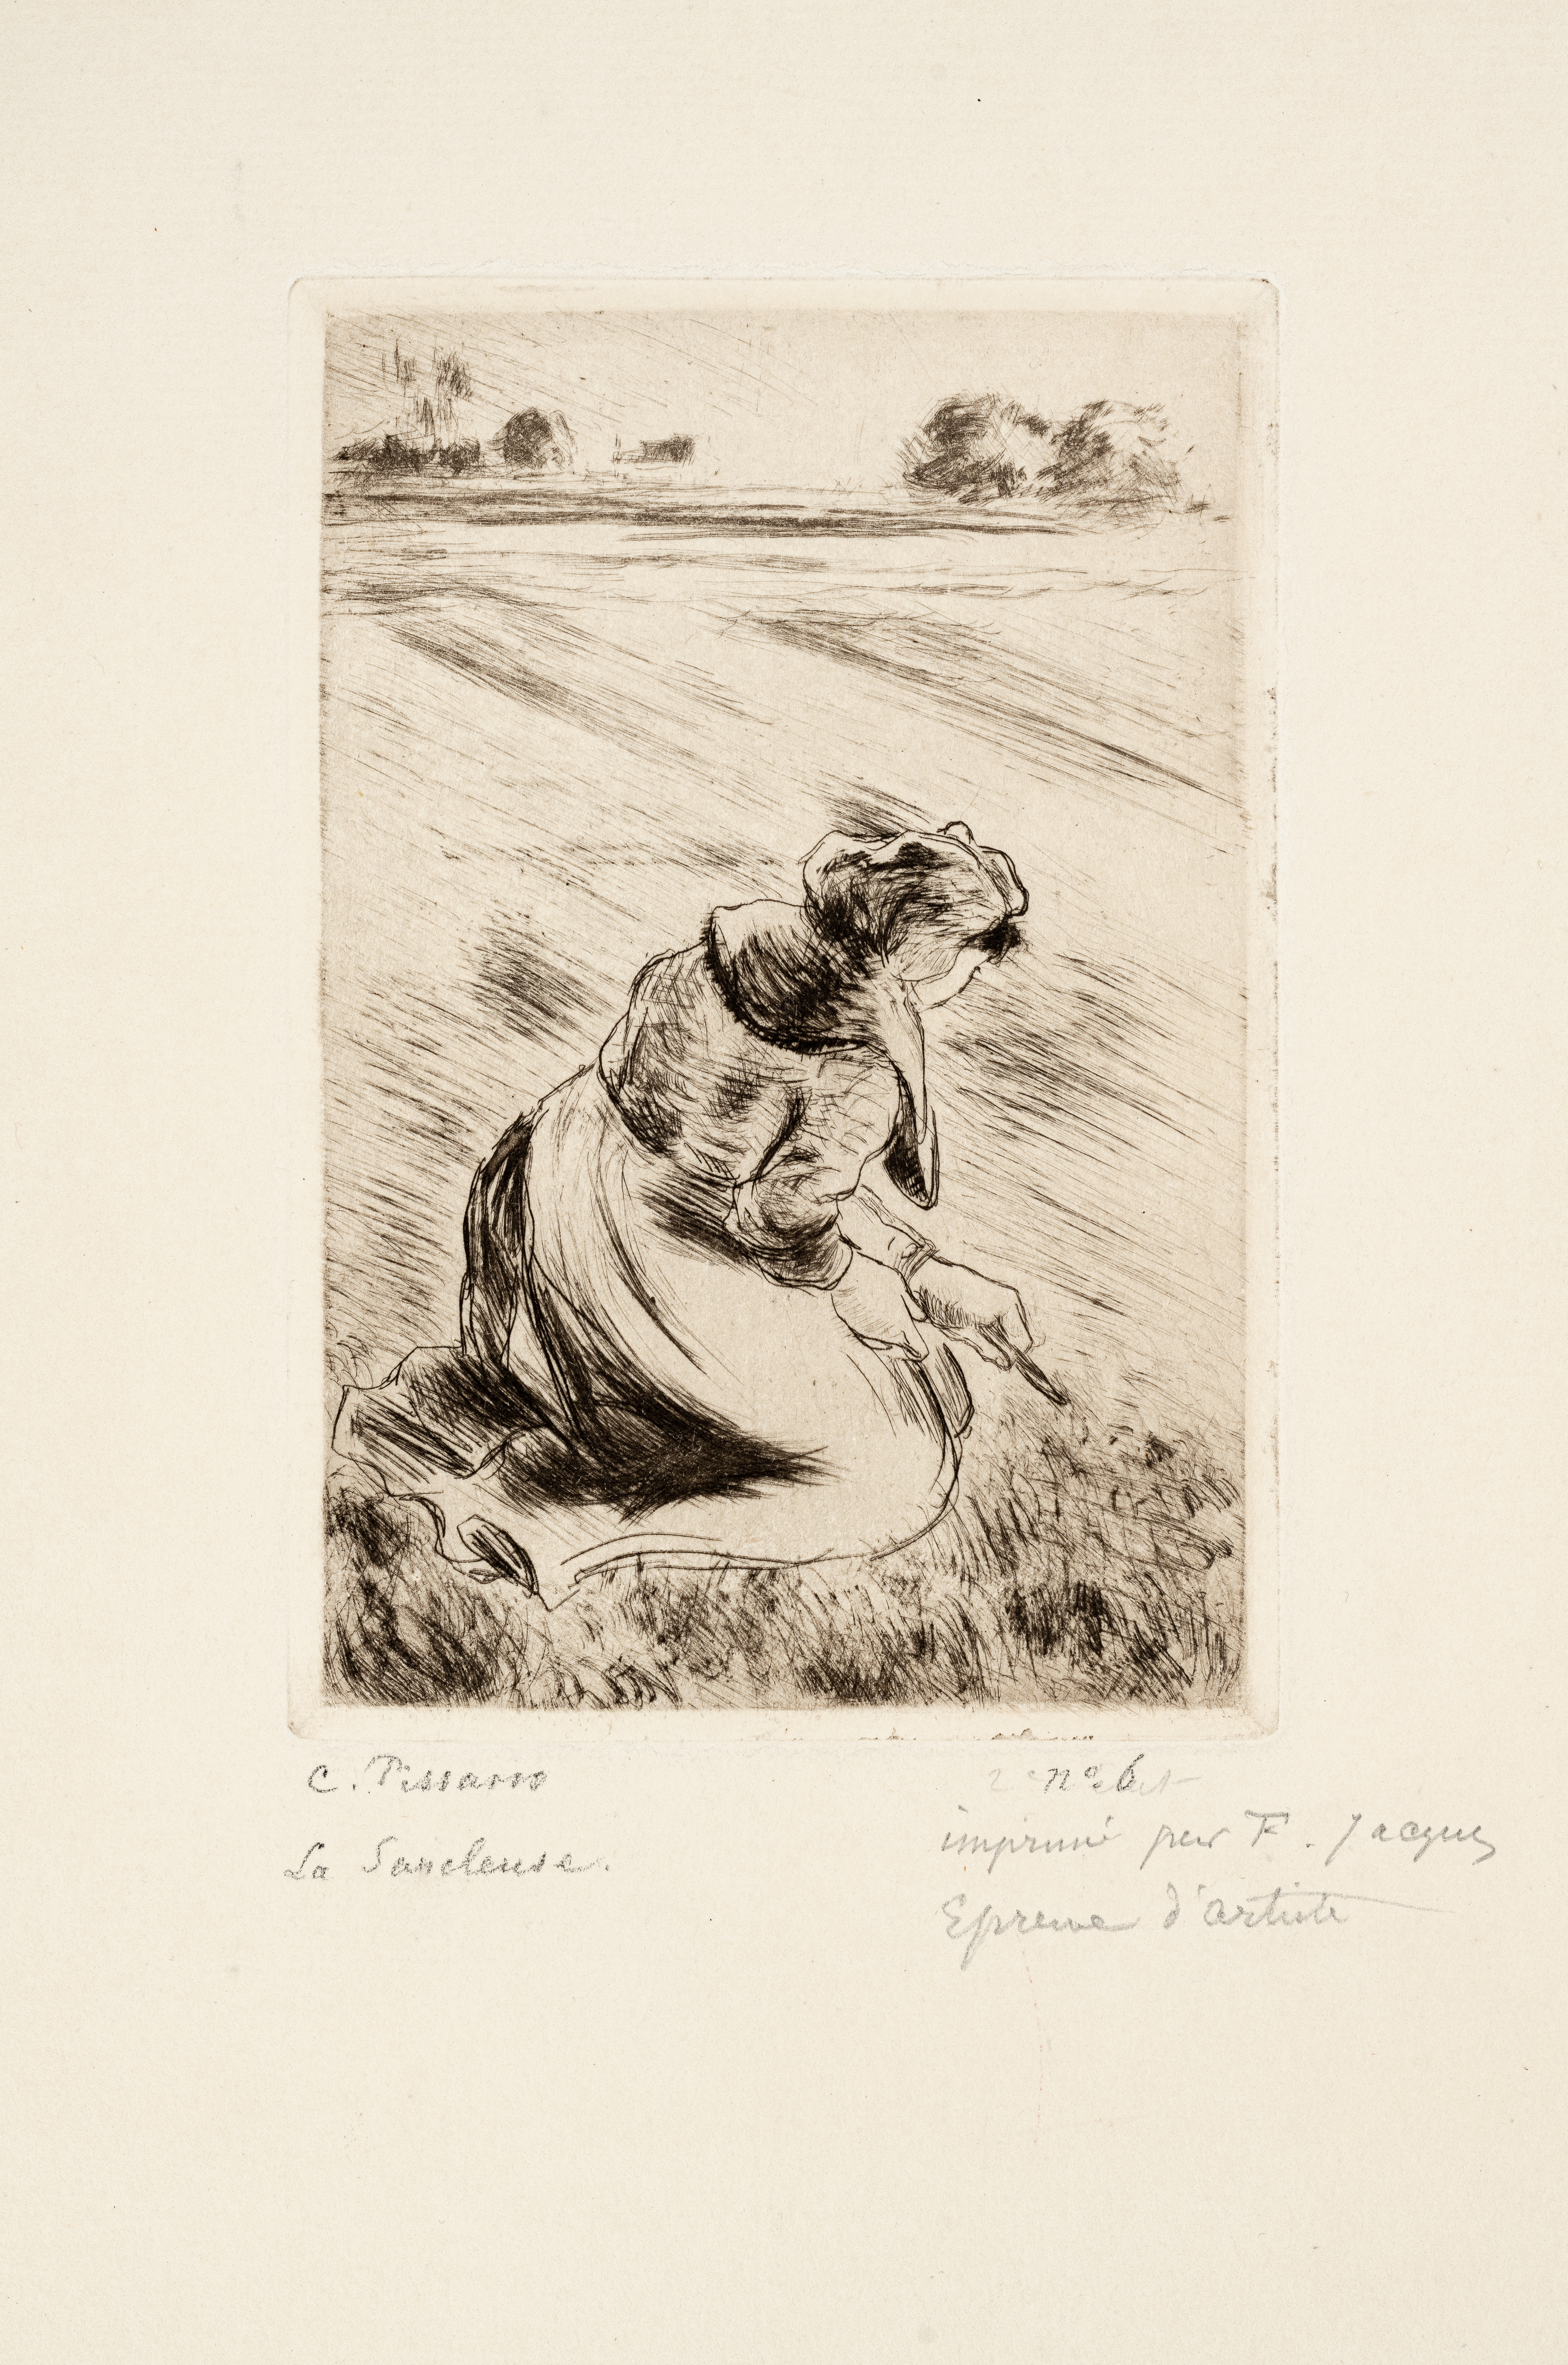 Camille Pissarro, La Sarcleuse, etching with drypoint, 1887